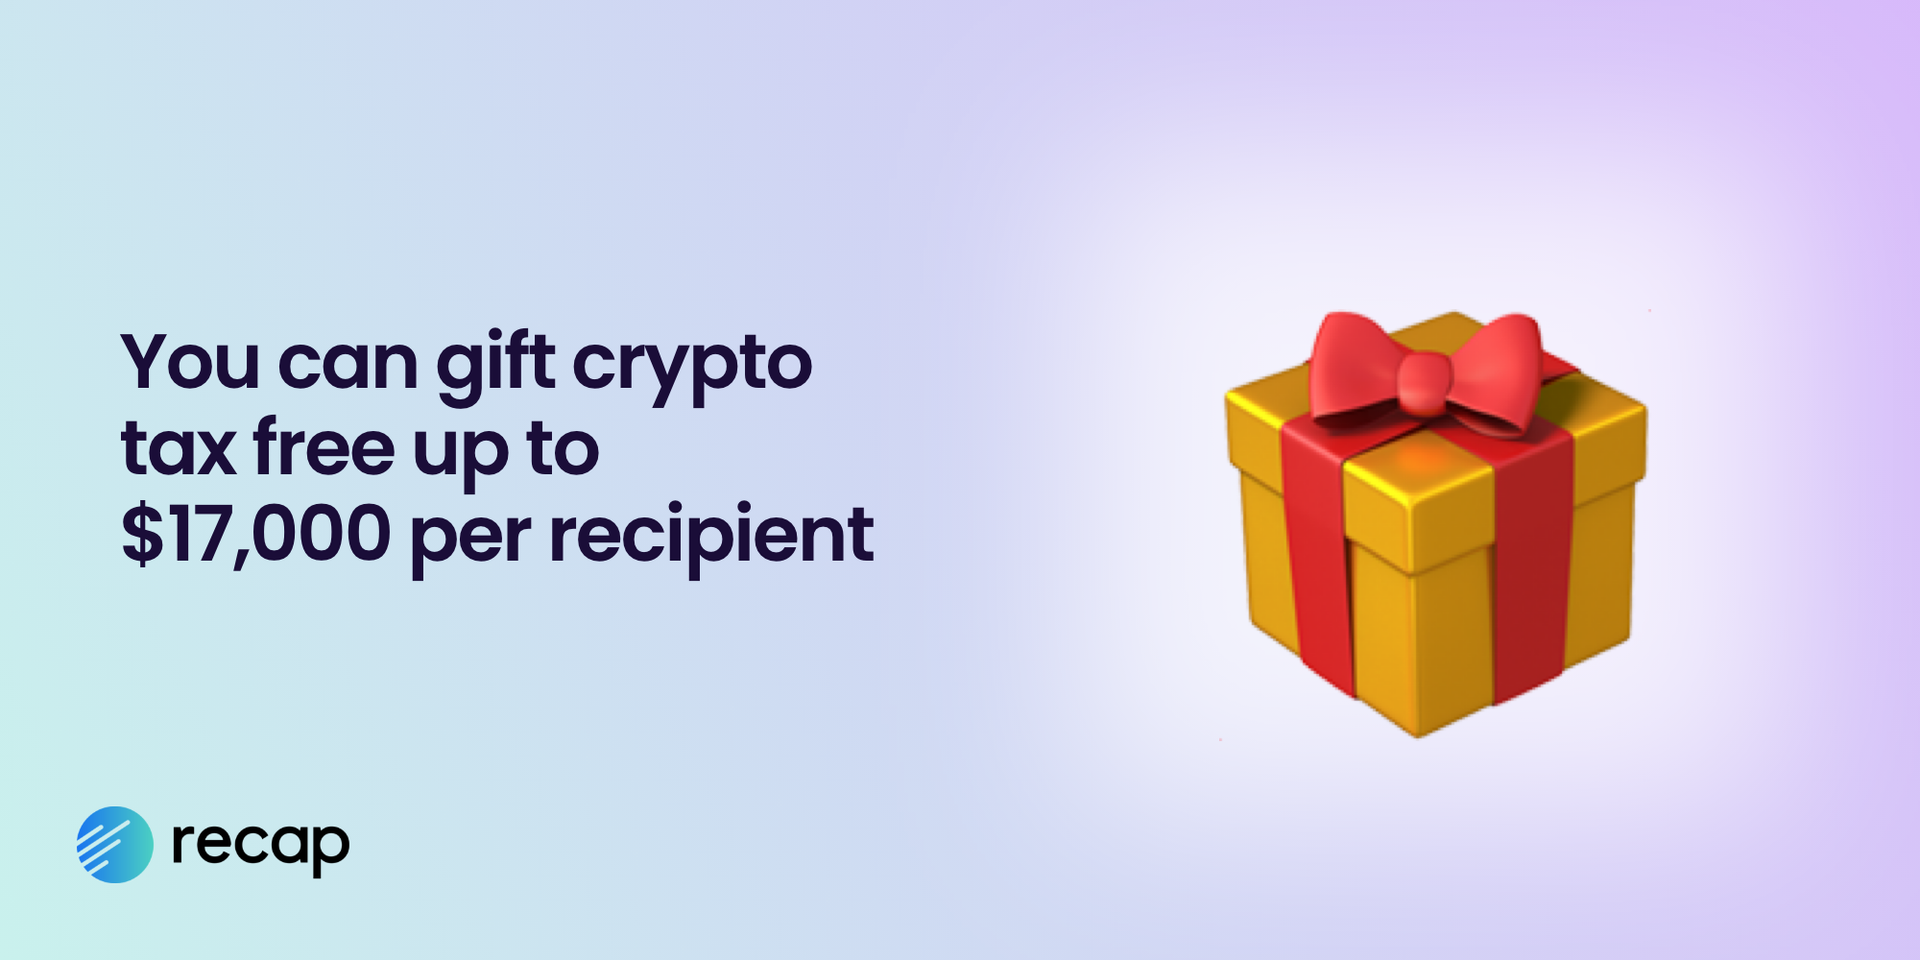 Illustration explaining you can gift crypto tax free up to $17,000 per recipient